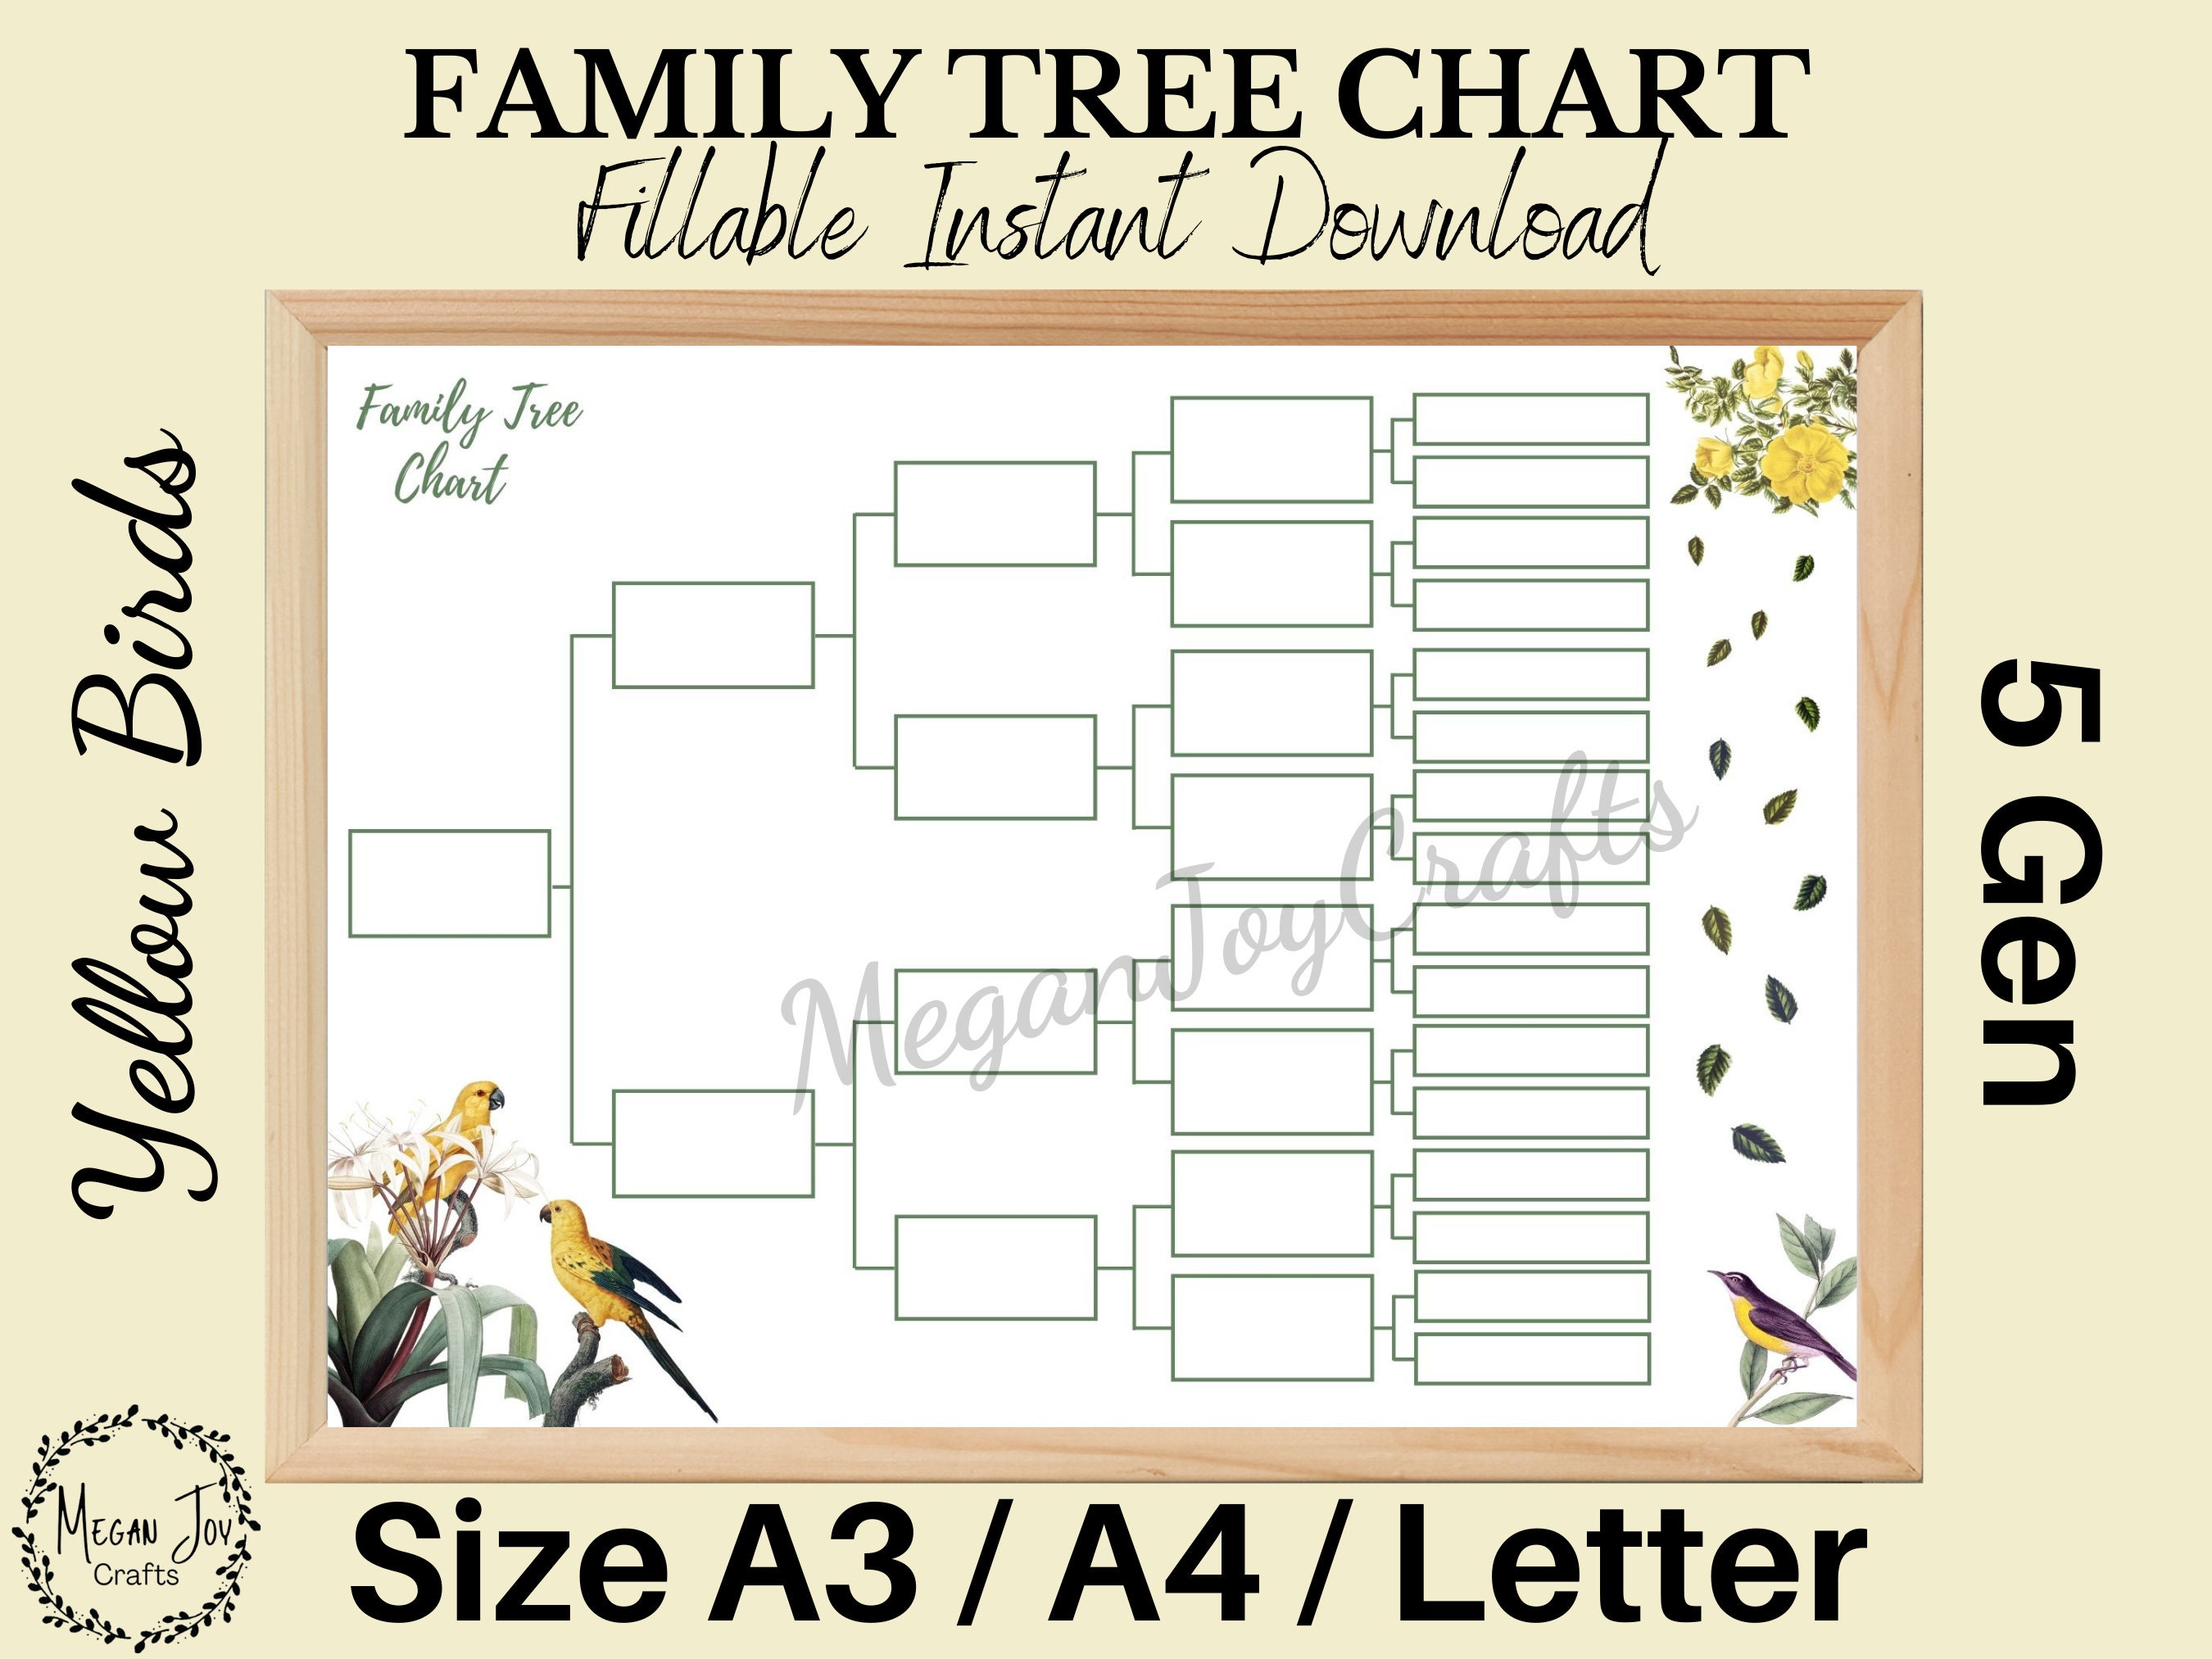 Printable family tree for kids to glue on birds as family members.